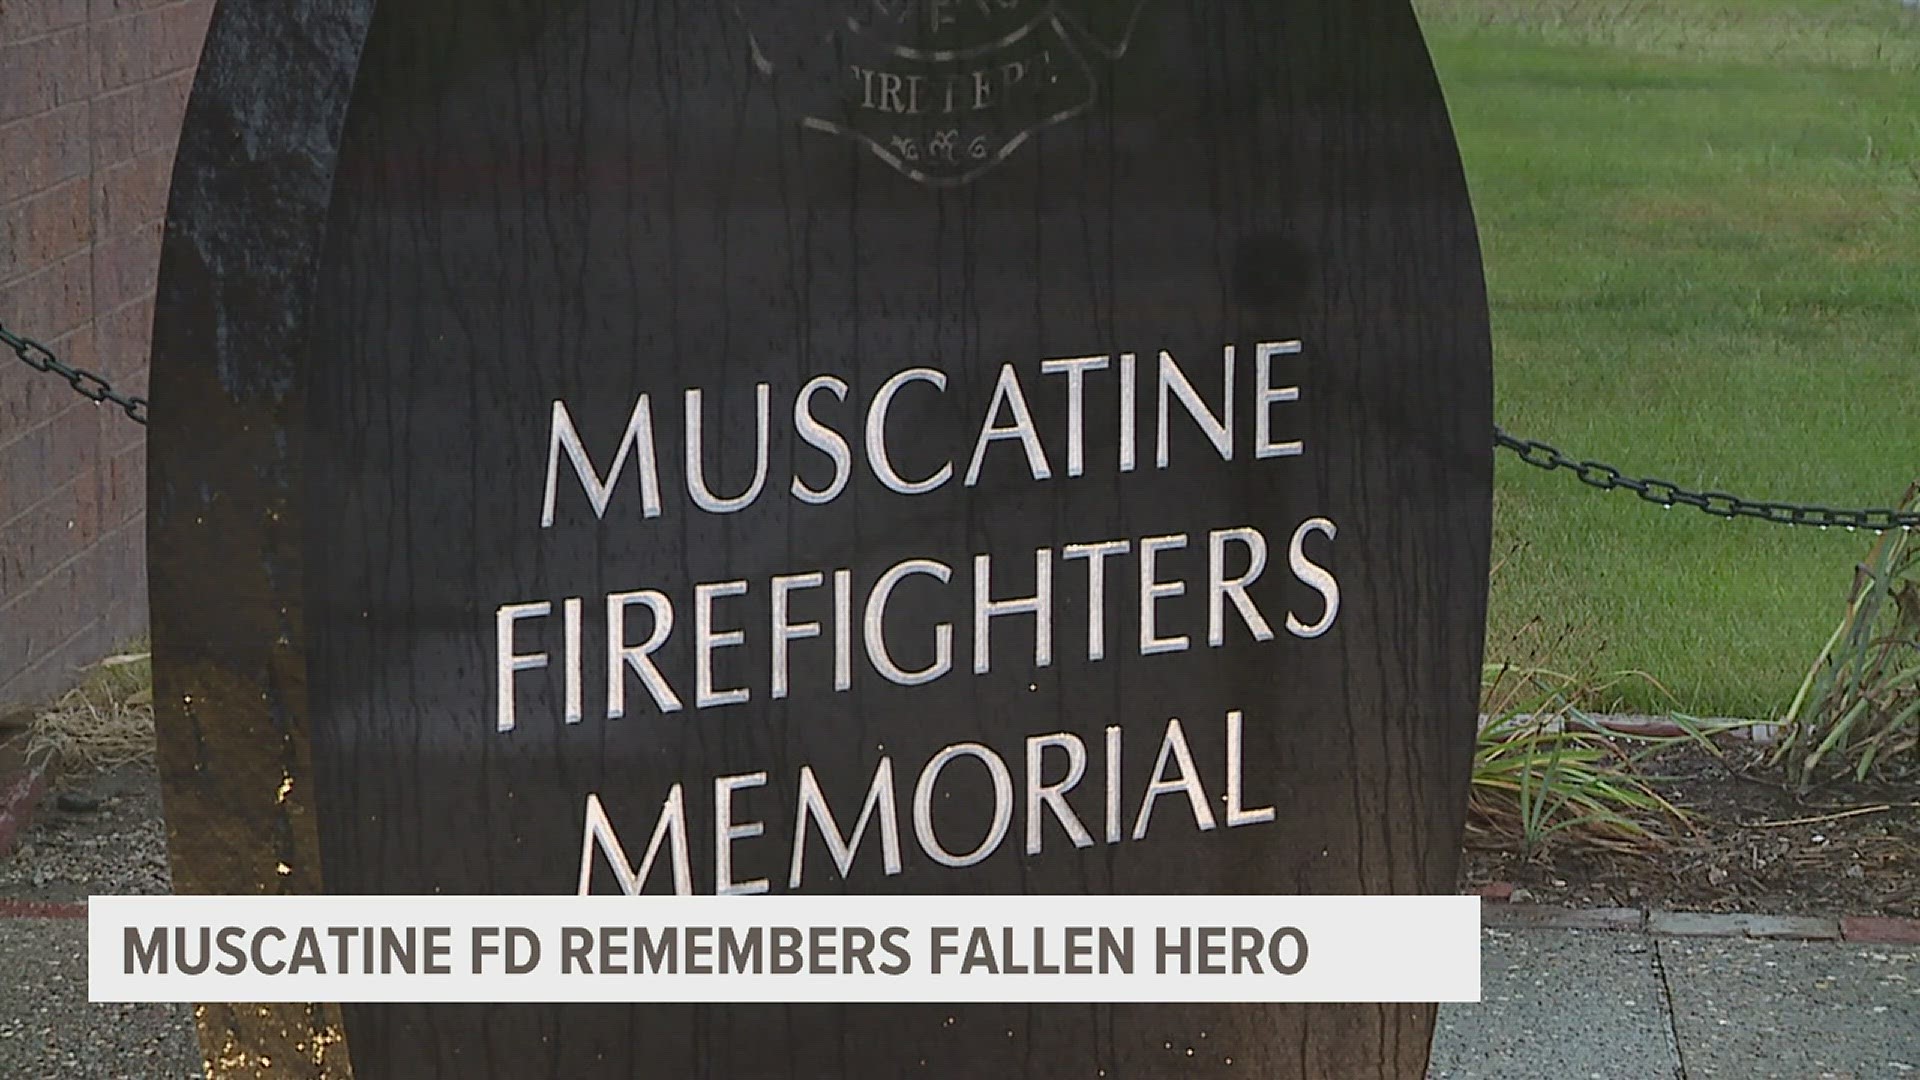 Firefighter Michael Kruse lost his life 21 years ago during a three-story house fire. On Thursday morning the fire department will hold a dedication ceremony.